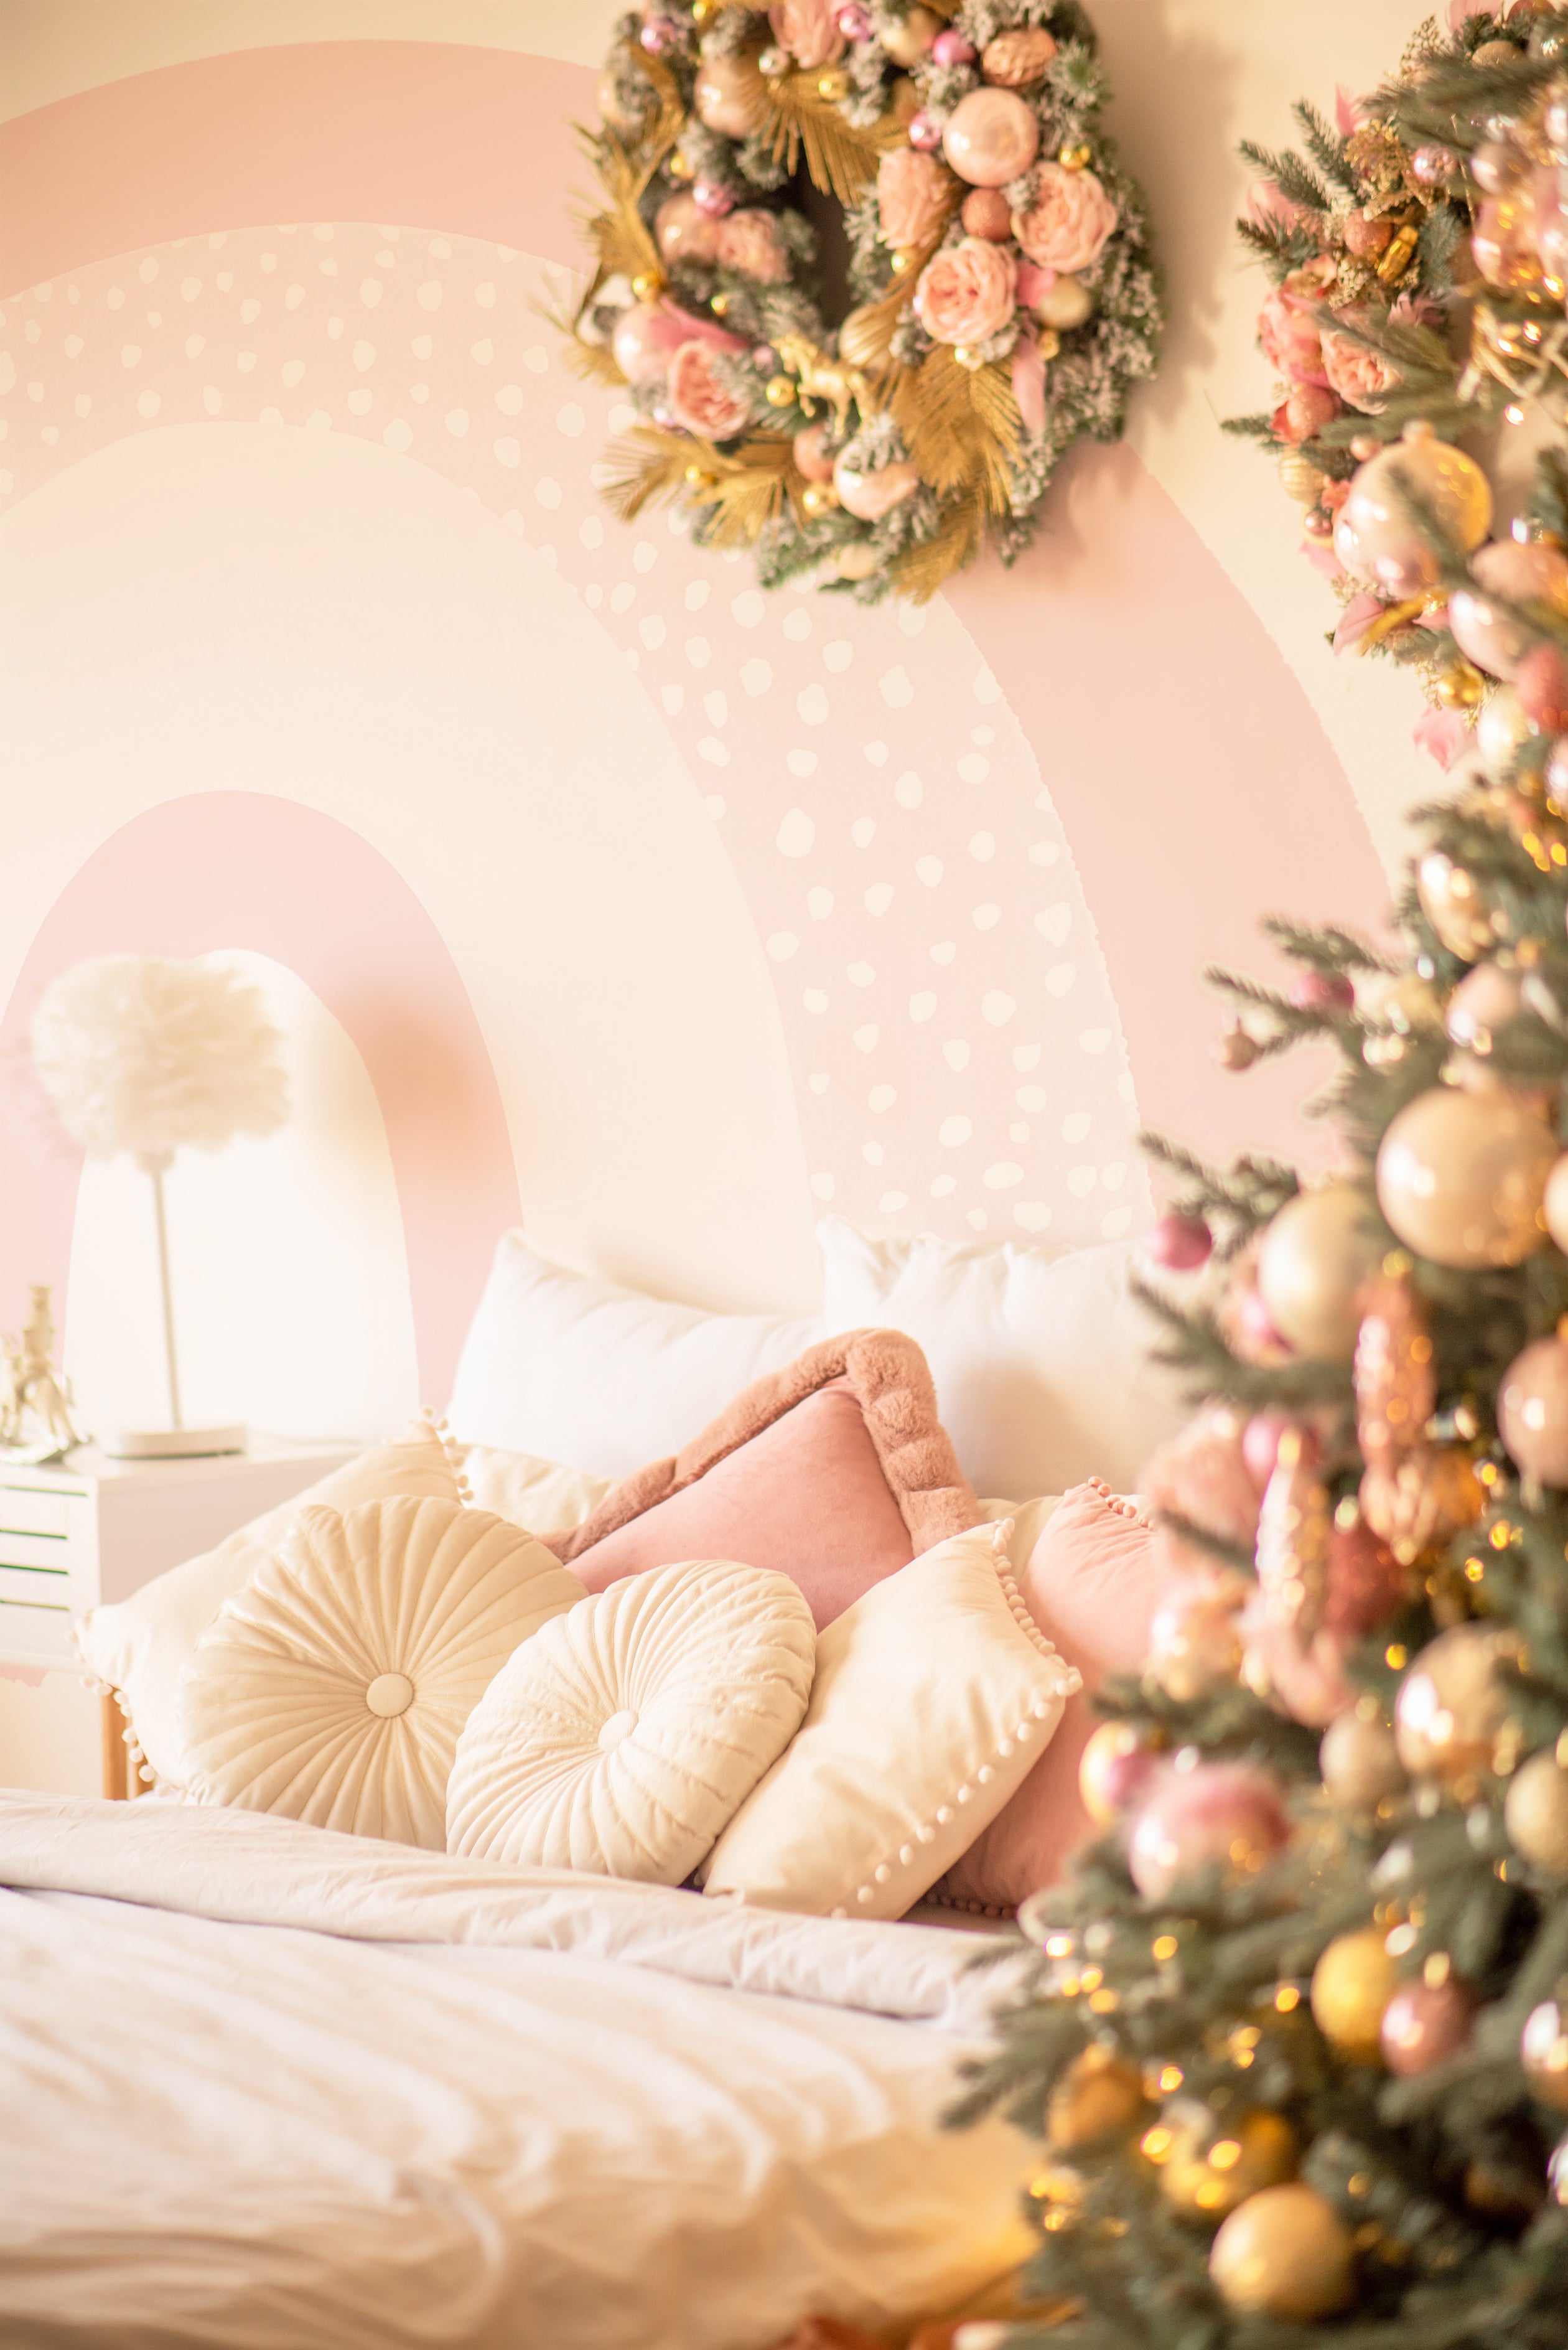 A festive holiday bedroom scene with Cute Rainbow Wallpaper Mural - Celeste adorning the wall. The mural features soft pastel rainbow arches with a dotted pattern, enhancing the warmth of the room decorated with Christmas elements, including a fully adorned tree and floral wreath.